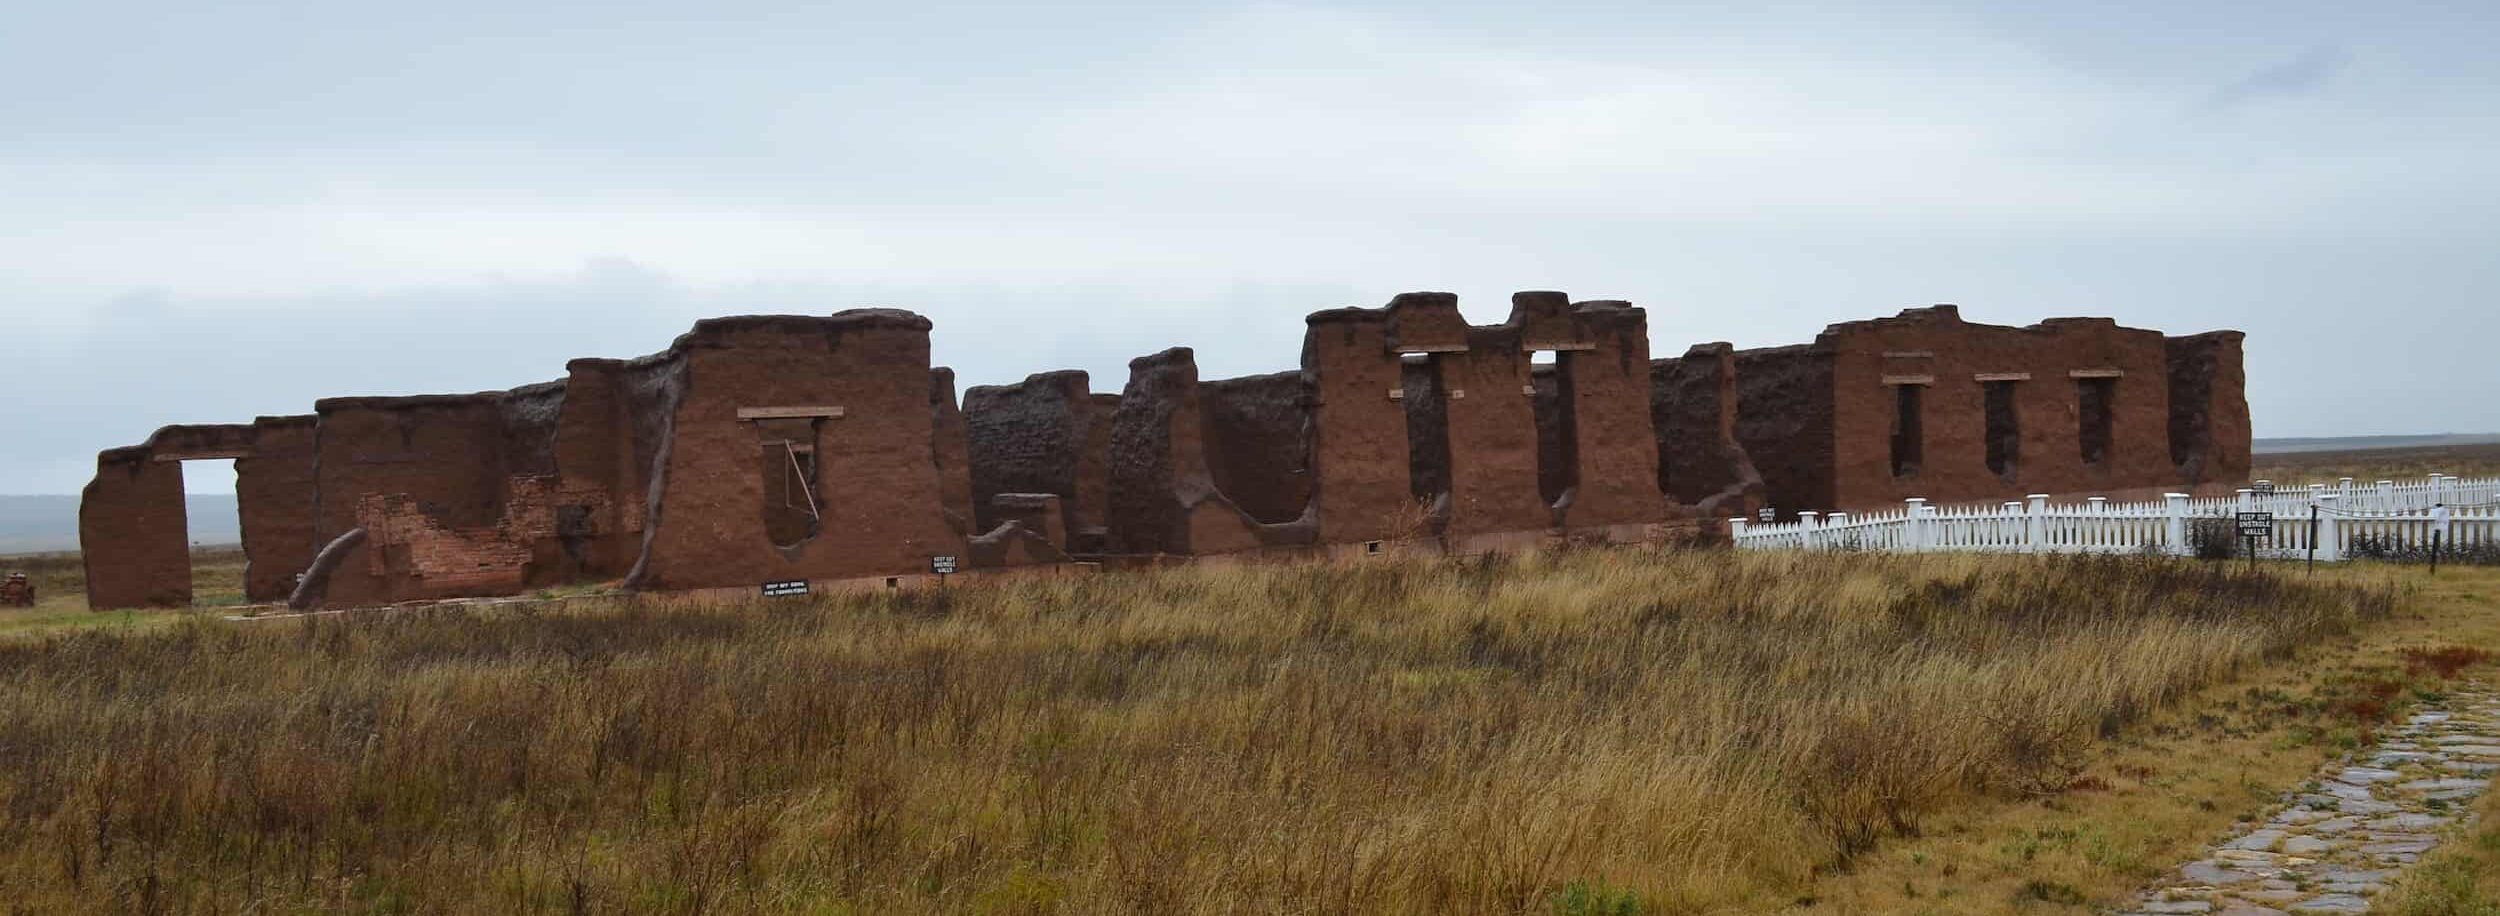 Hospital at Fort Union National Monument in New Mexico